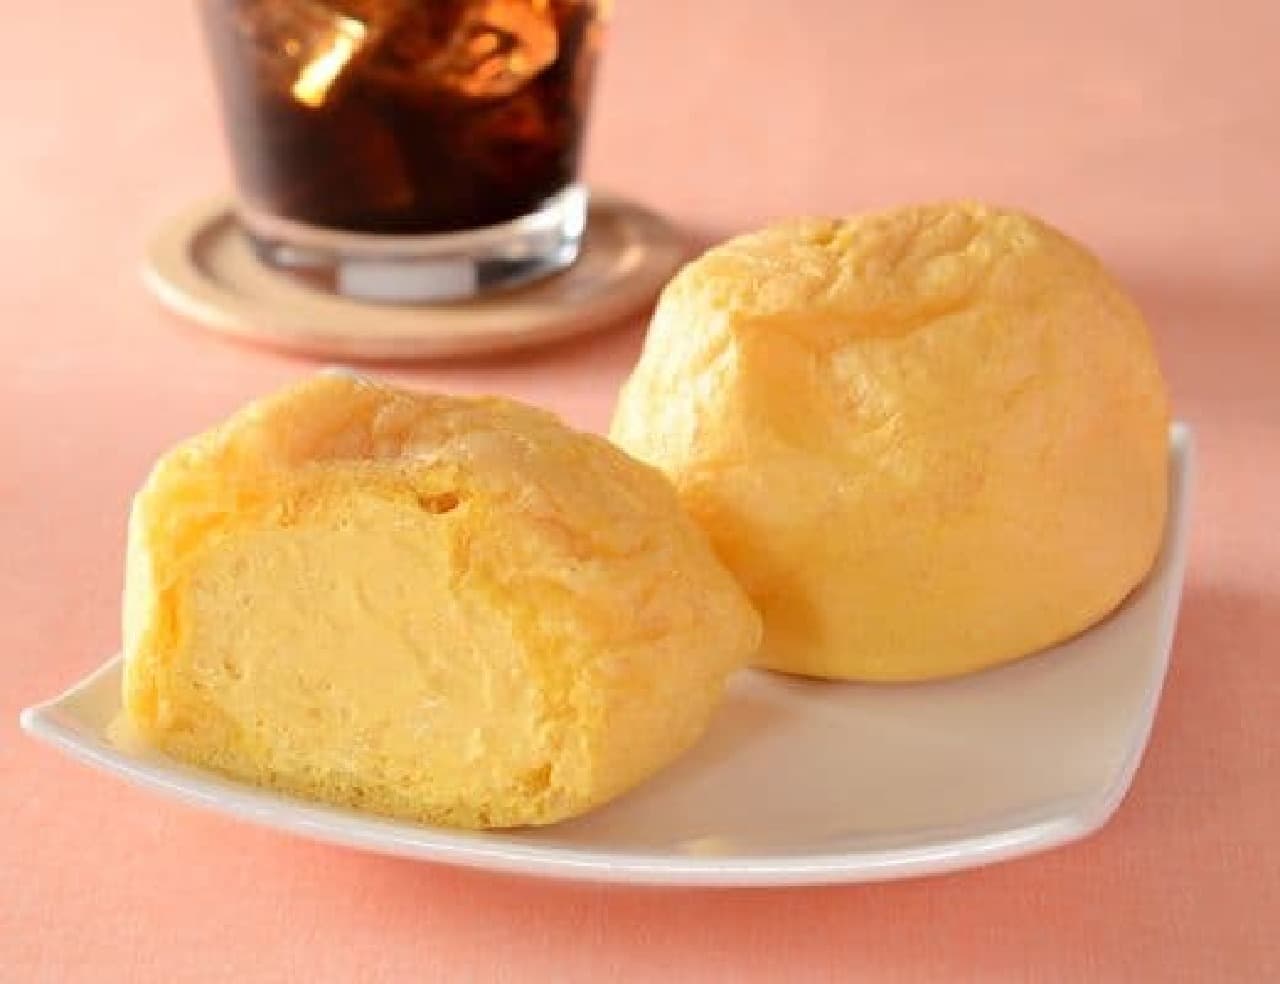 Mango puffs with a soft and fluffy dough